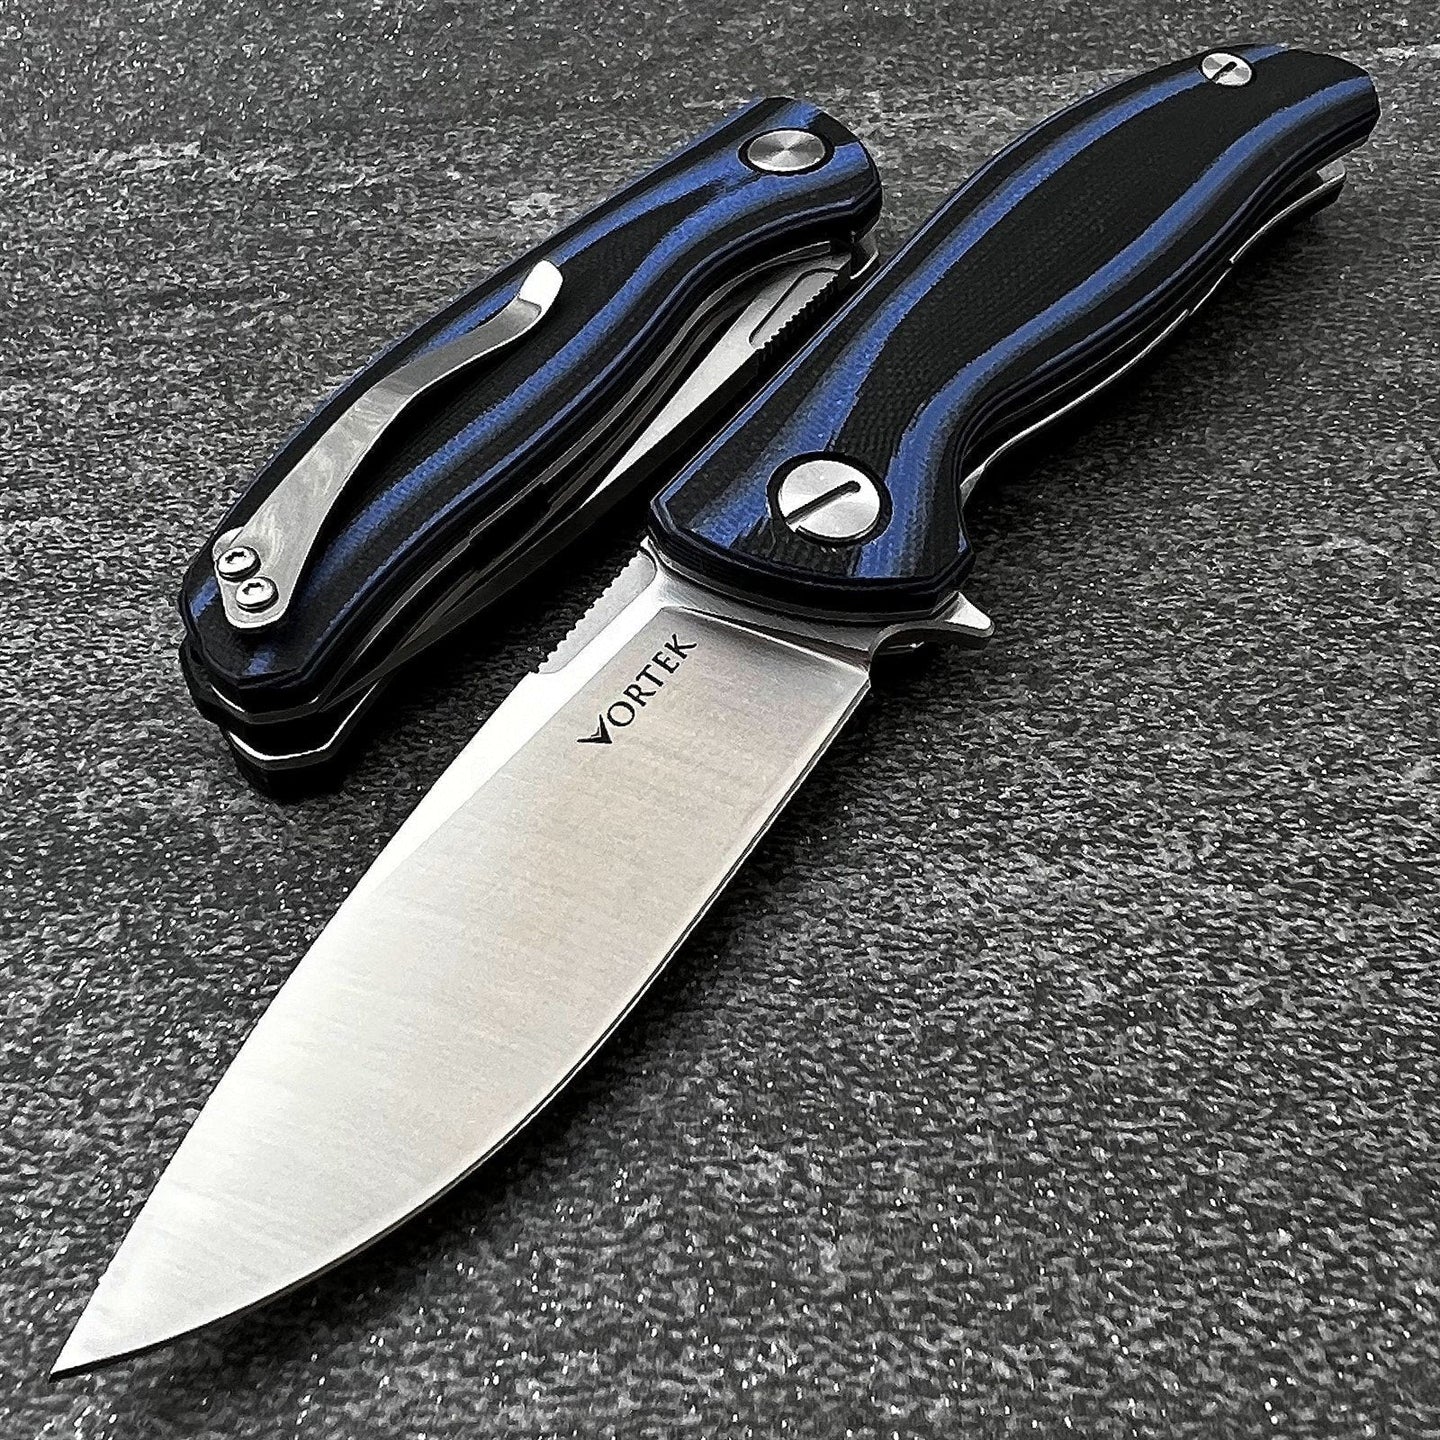 TURRET: Black and Blue G10 Handles, D2 Drop Point Blade